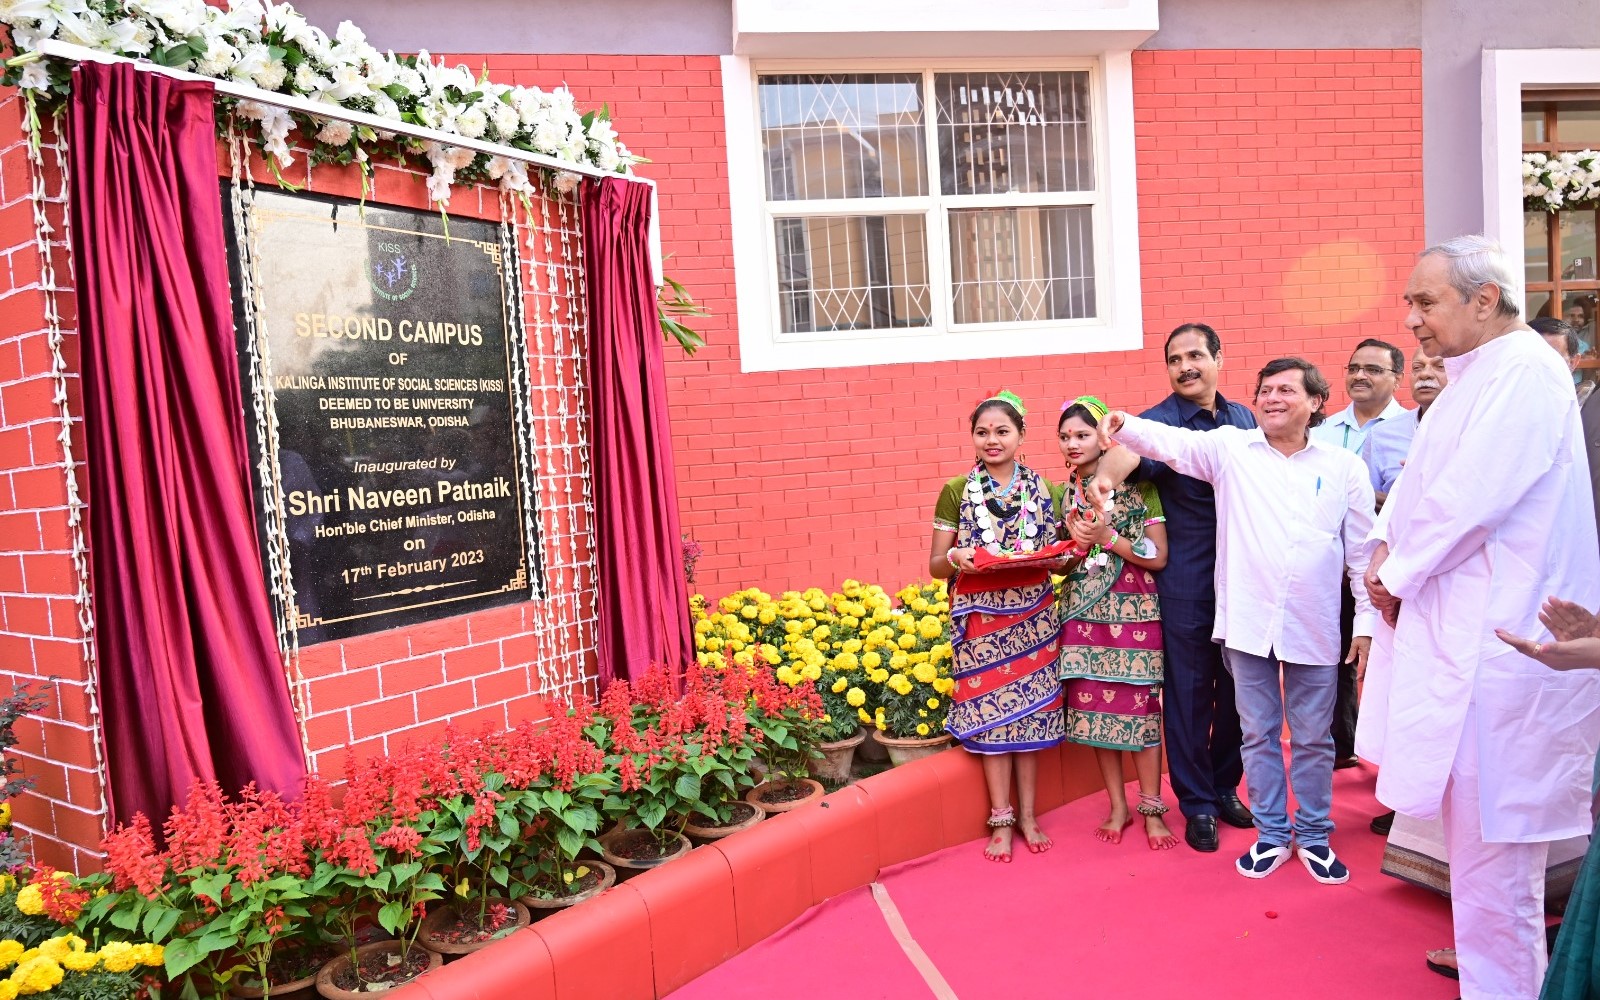 Odisha CM Inaugurates Sports Facilities after Legends The CM also inaugurated the Second Campus of KISS DU